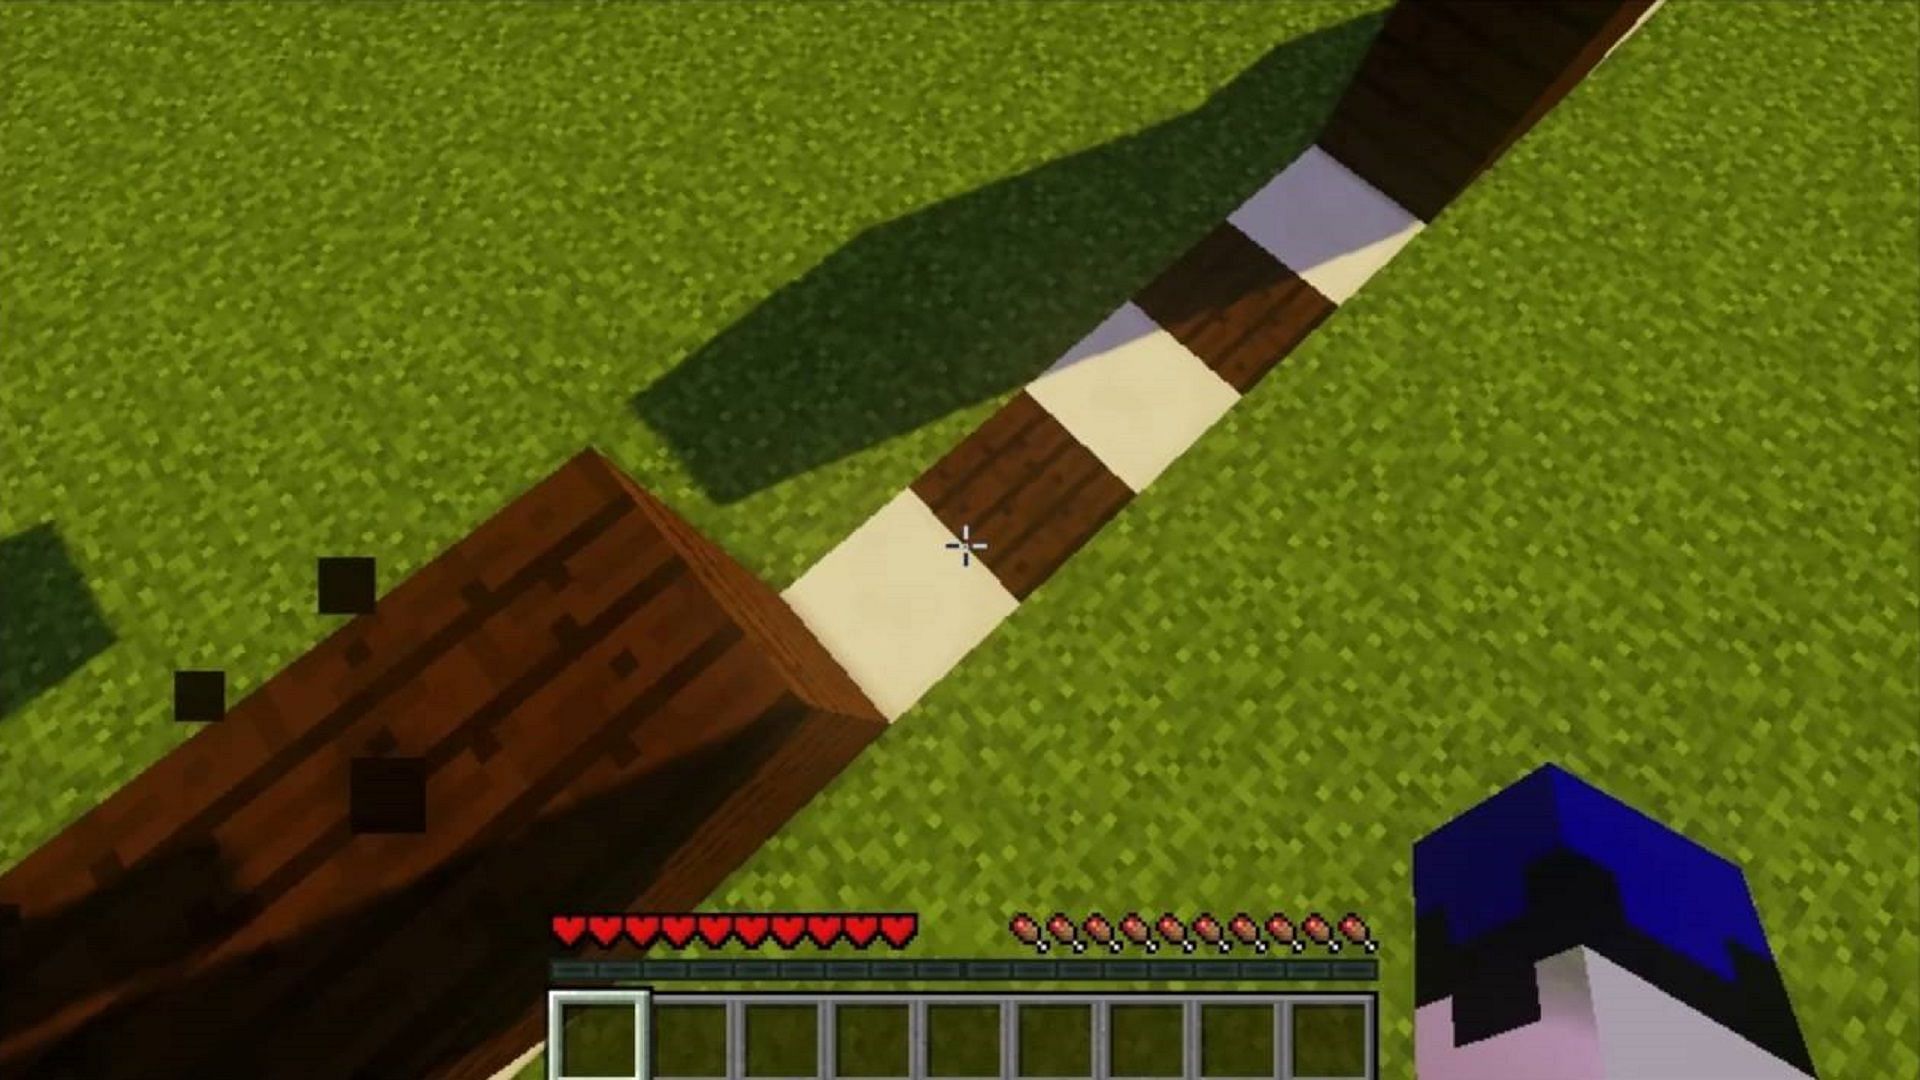 A player measures a five-block jump distance (Image via Kyroh Jc/Pk/YouTube)